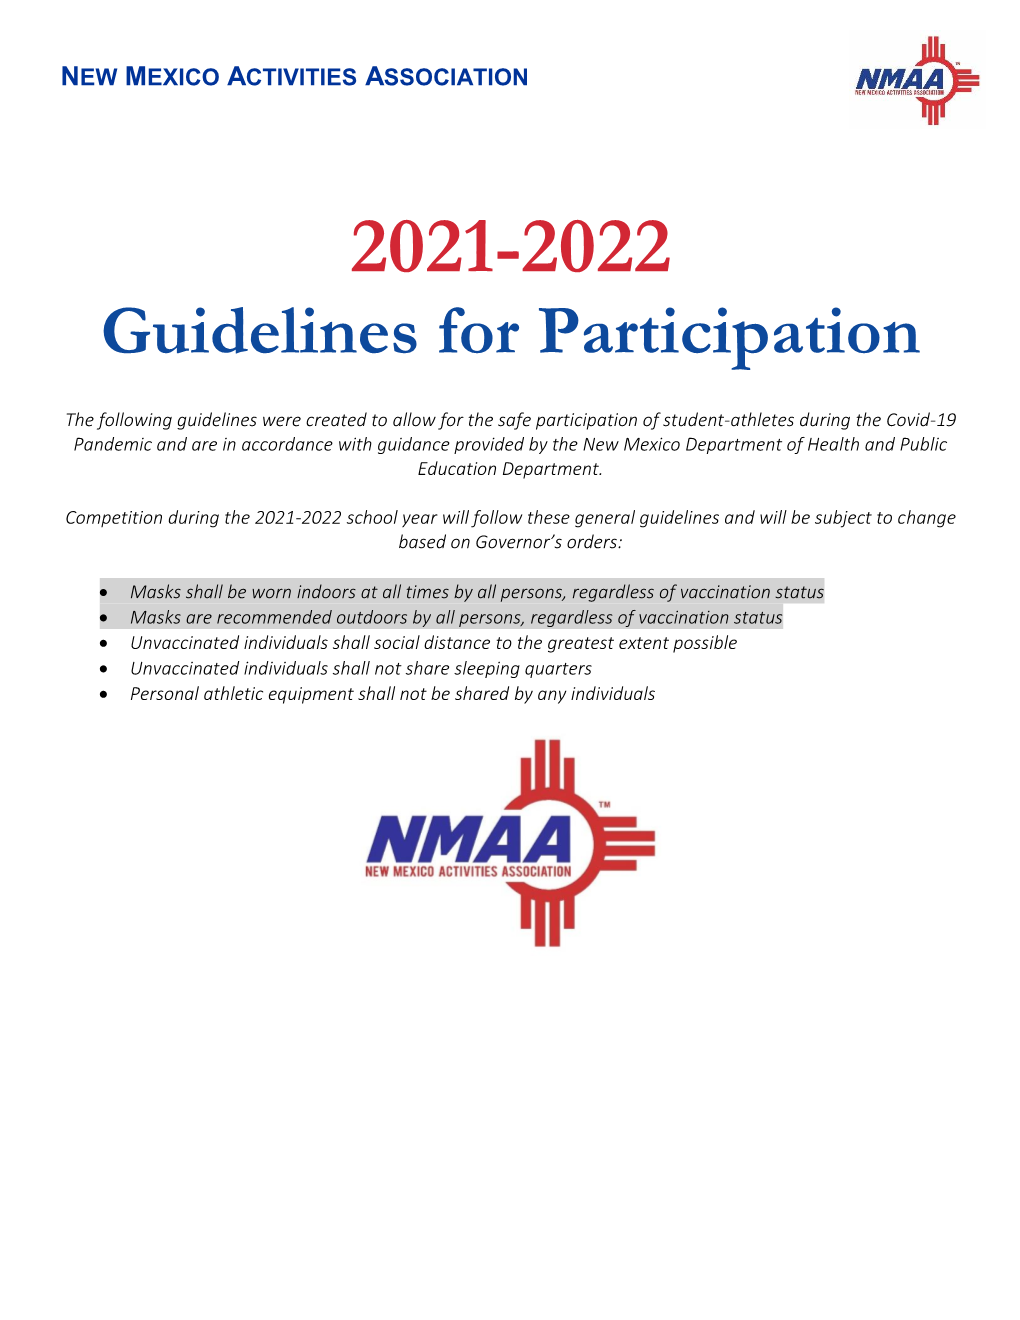 2021-2022 Guidelines for Participation